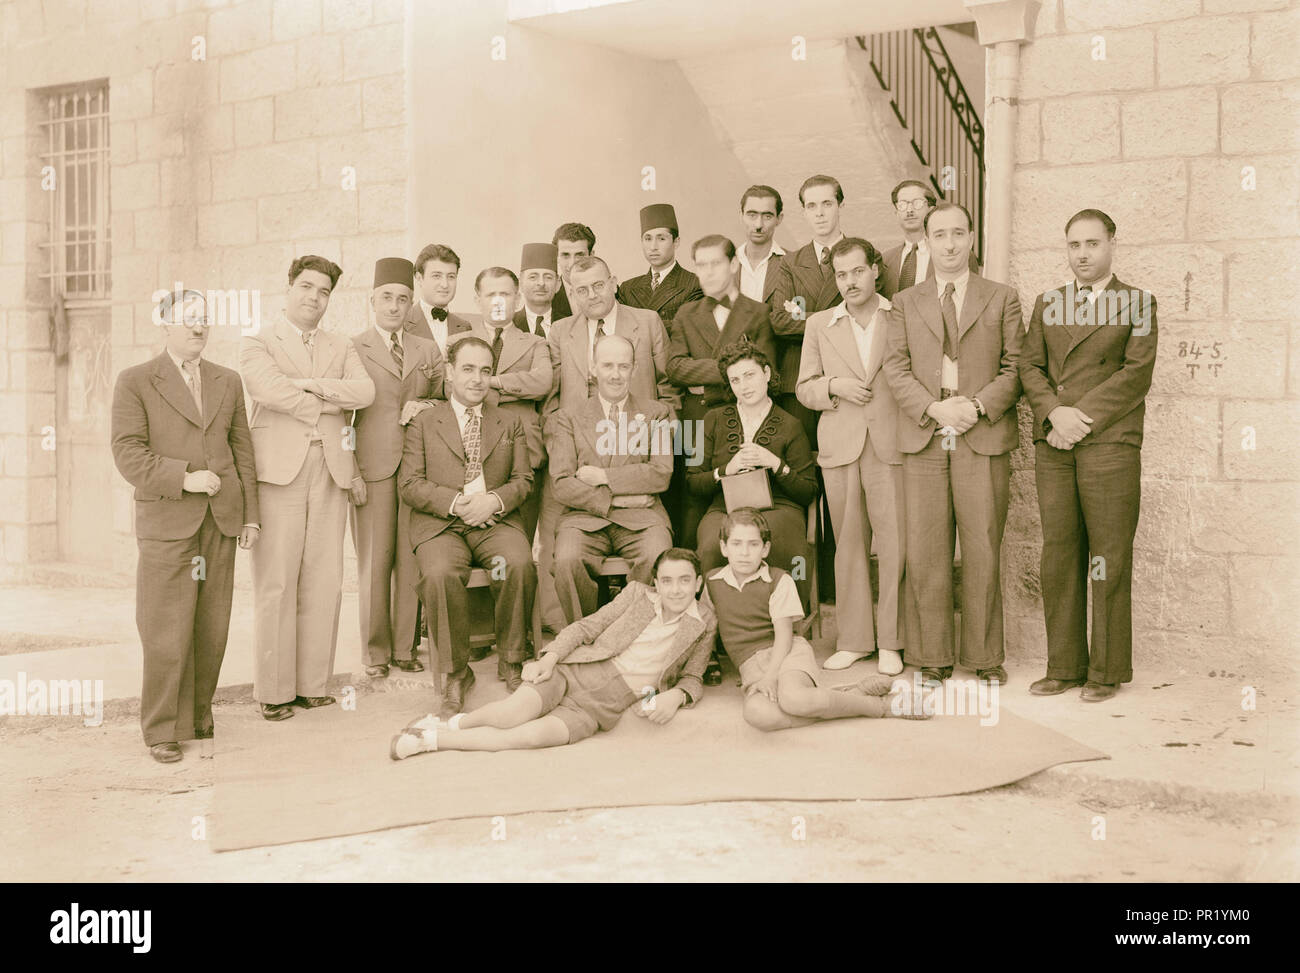 P.B.S. [i.e., Palestine Broadcasting Service] and P.J[?].O. groups, Mr. Tweedy's farewell groups. Group at Arab section of P.B.S Stock Photo